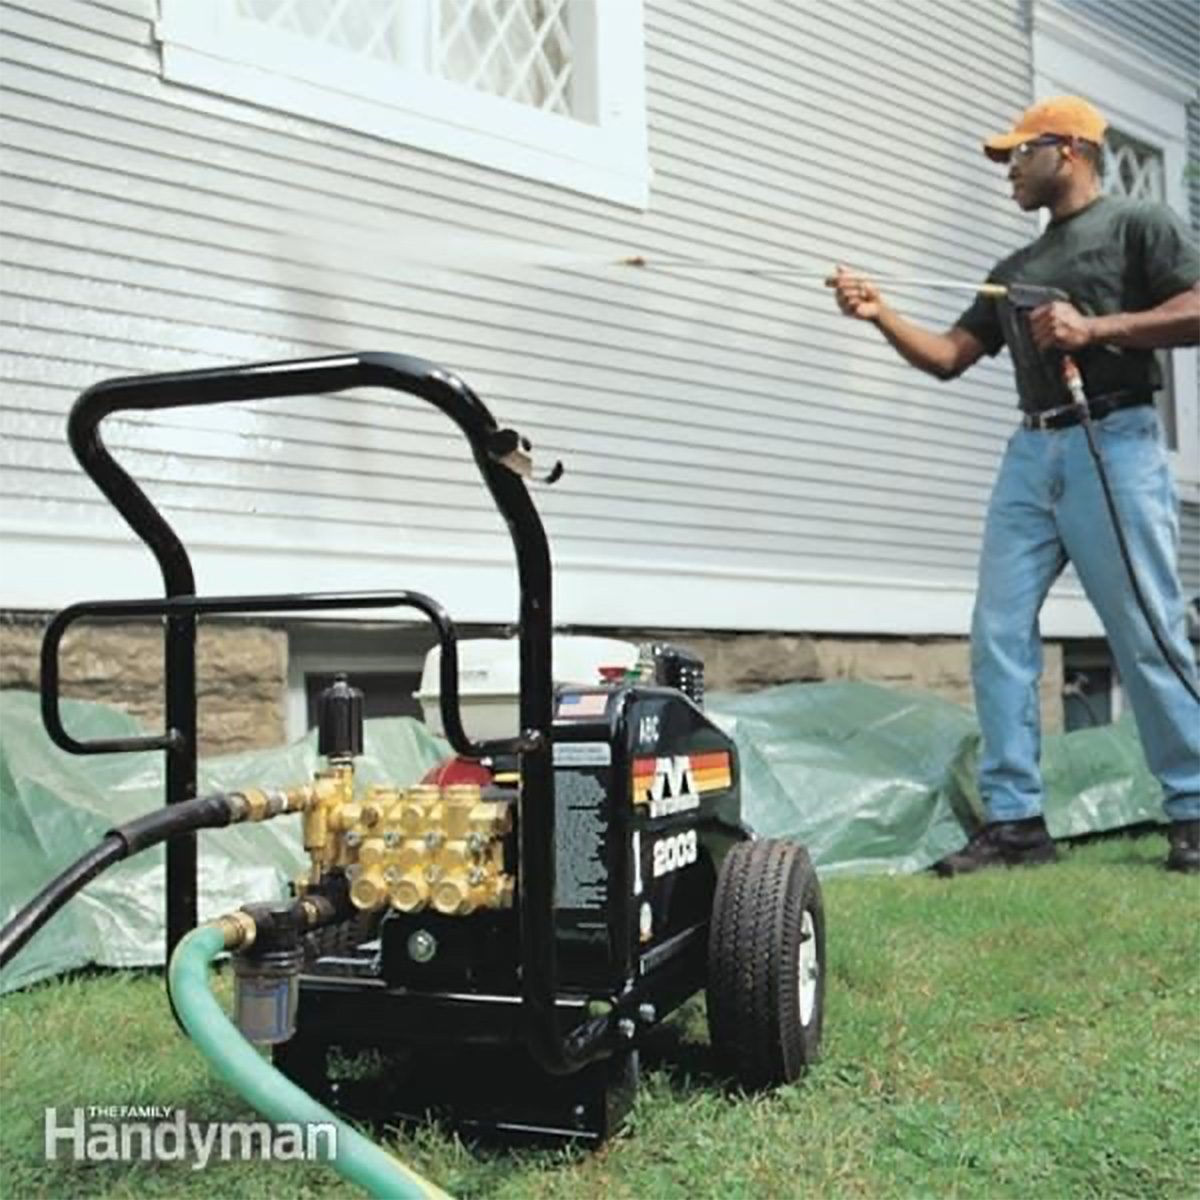 How to Choose a Pressure Washer That's Right for You